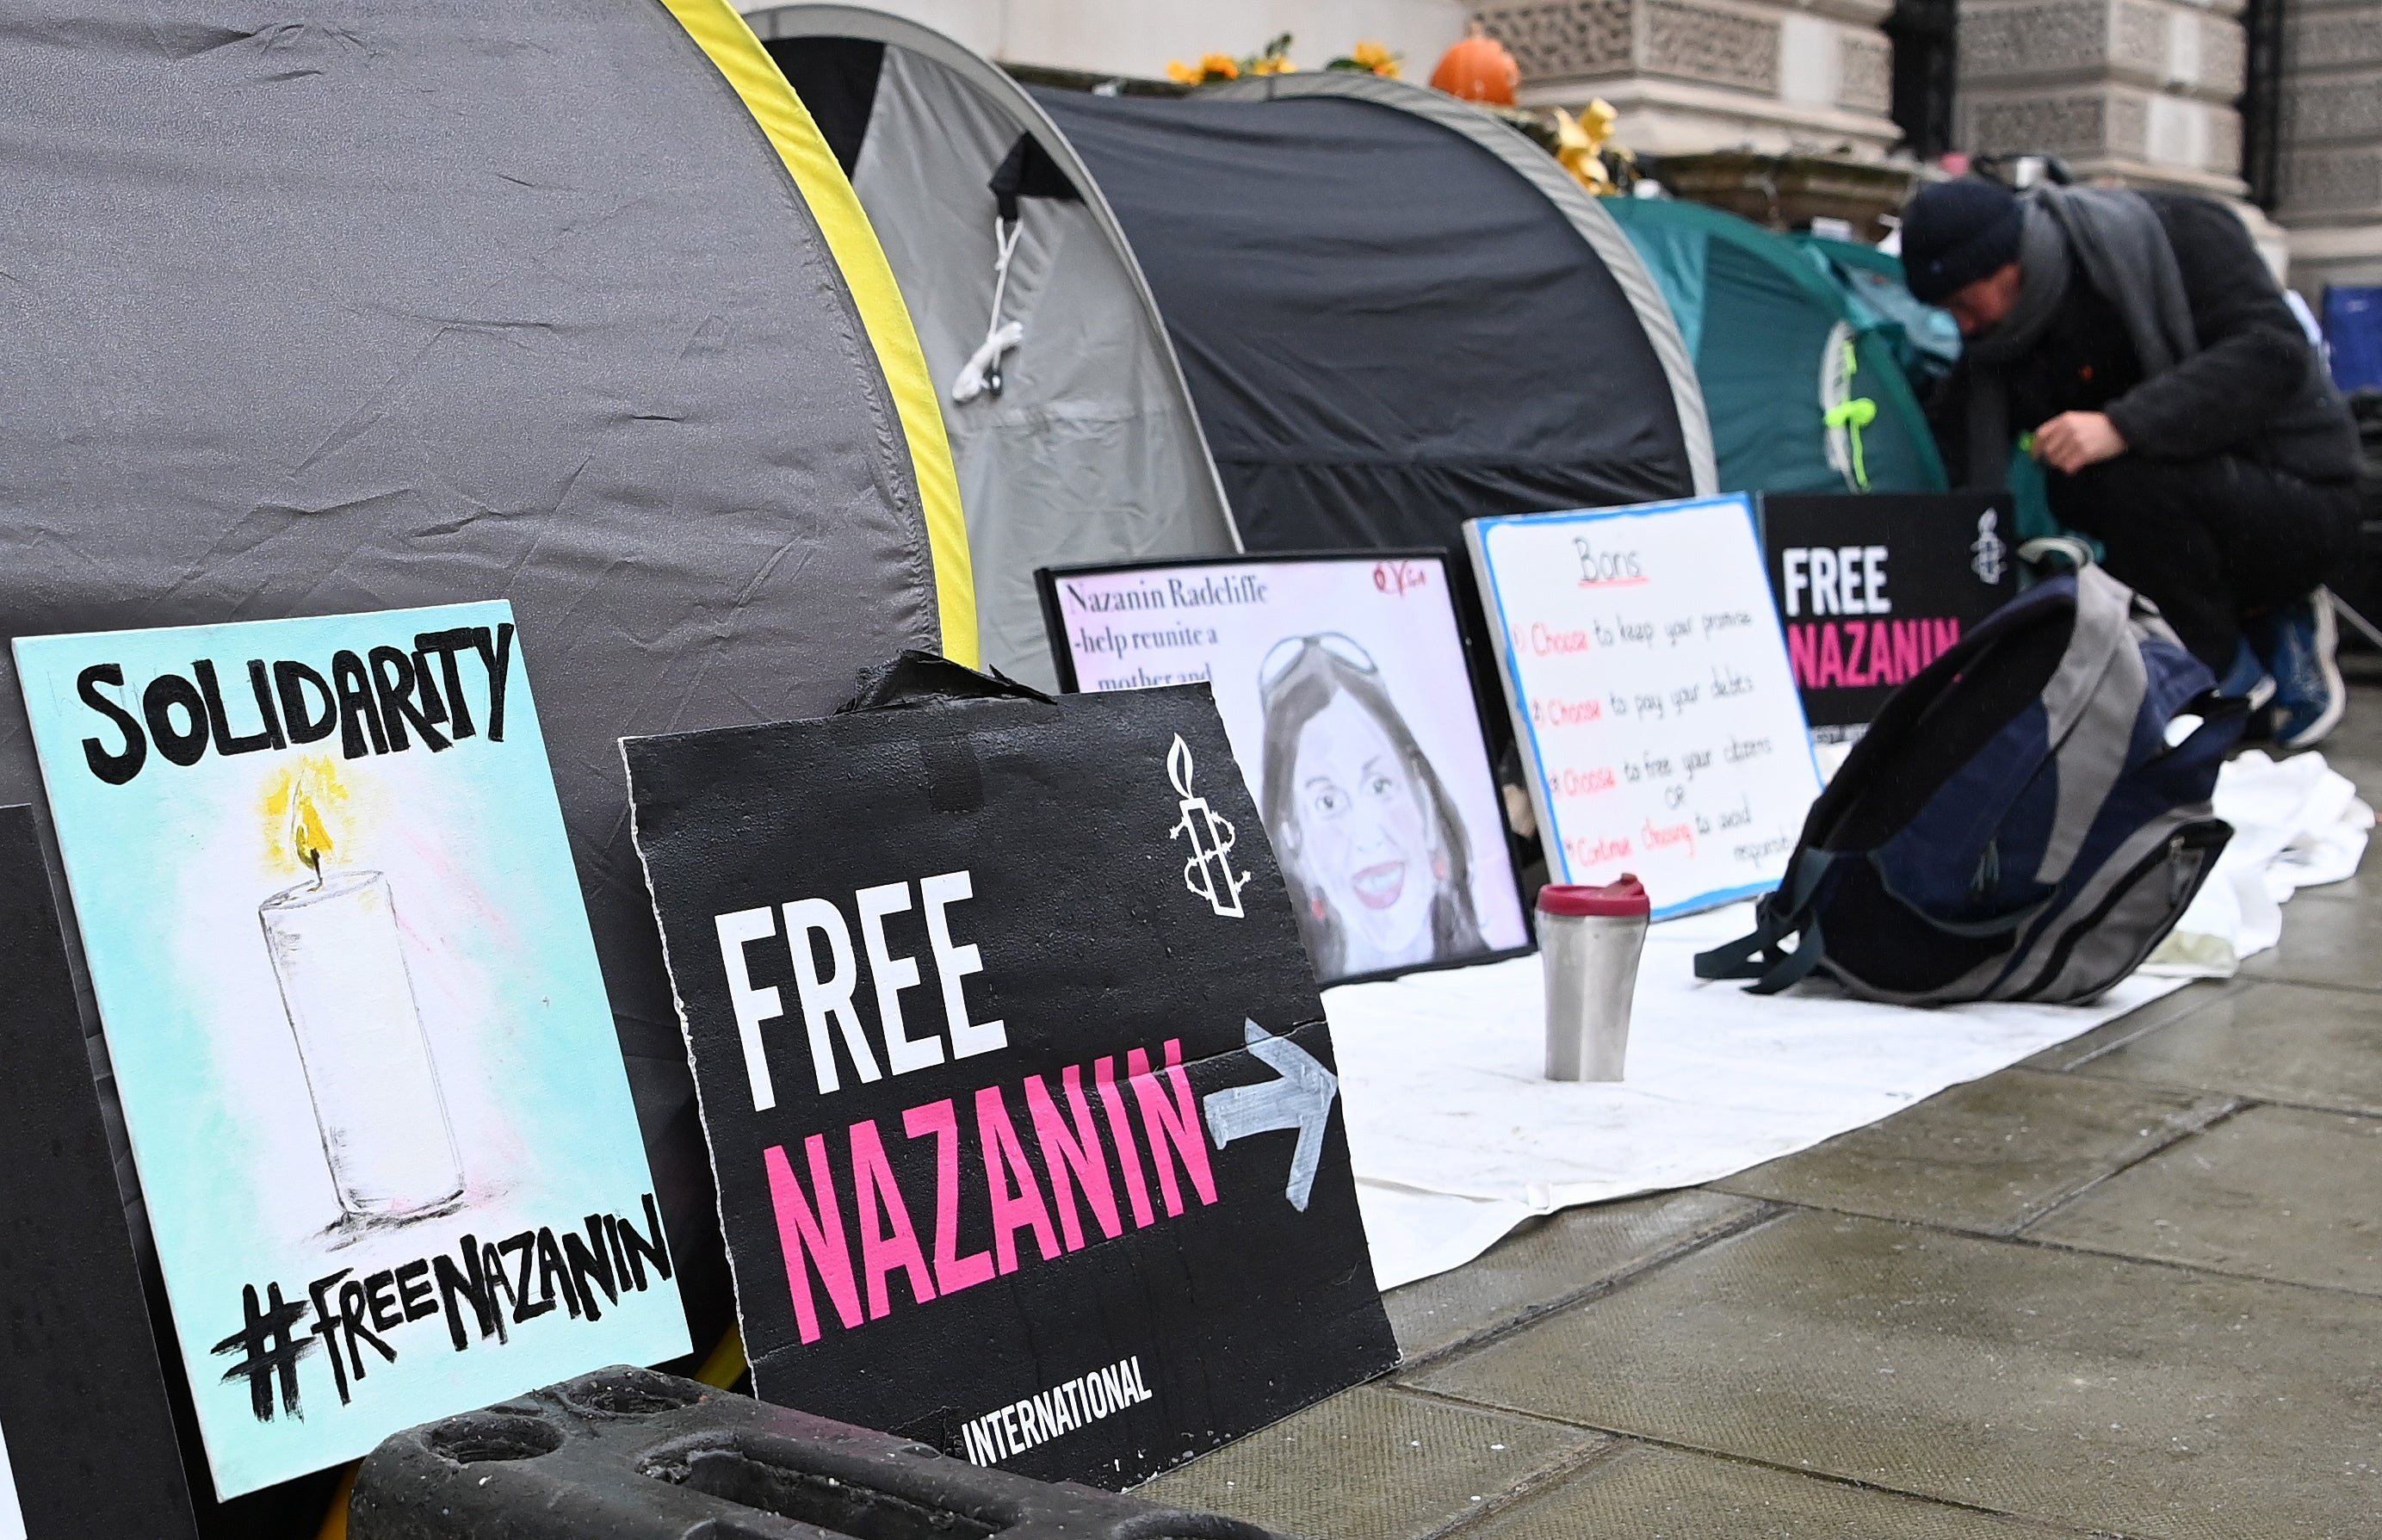 The UK government is calling for the release of Nazanin Zaghari-Ratcliffe